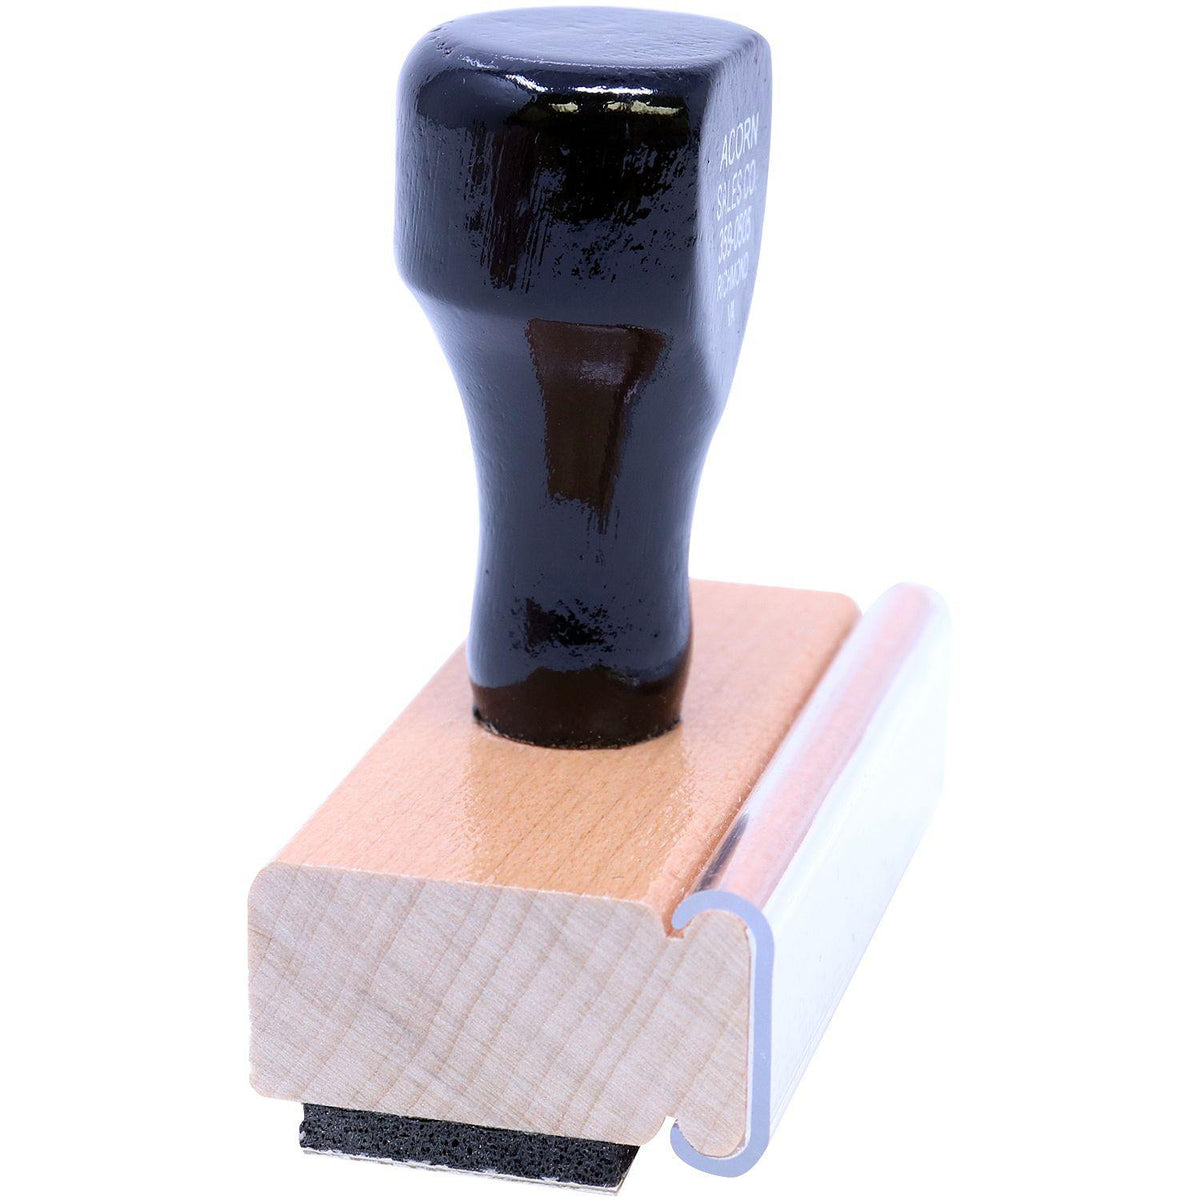 Side View of Dismissal Rubber Stamp at an Angle